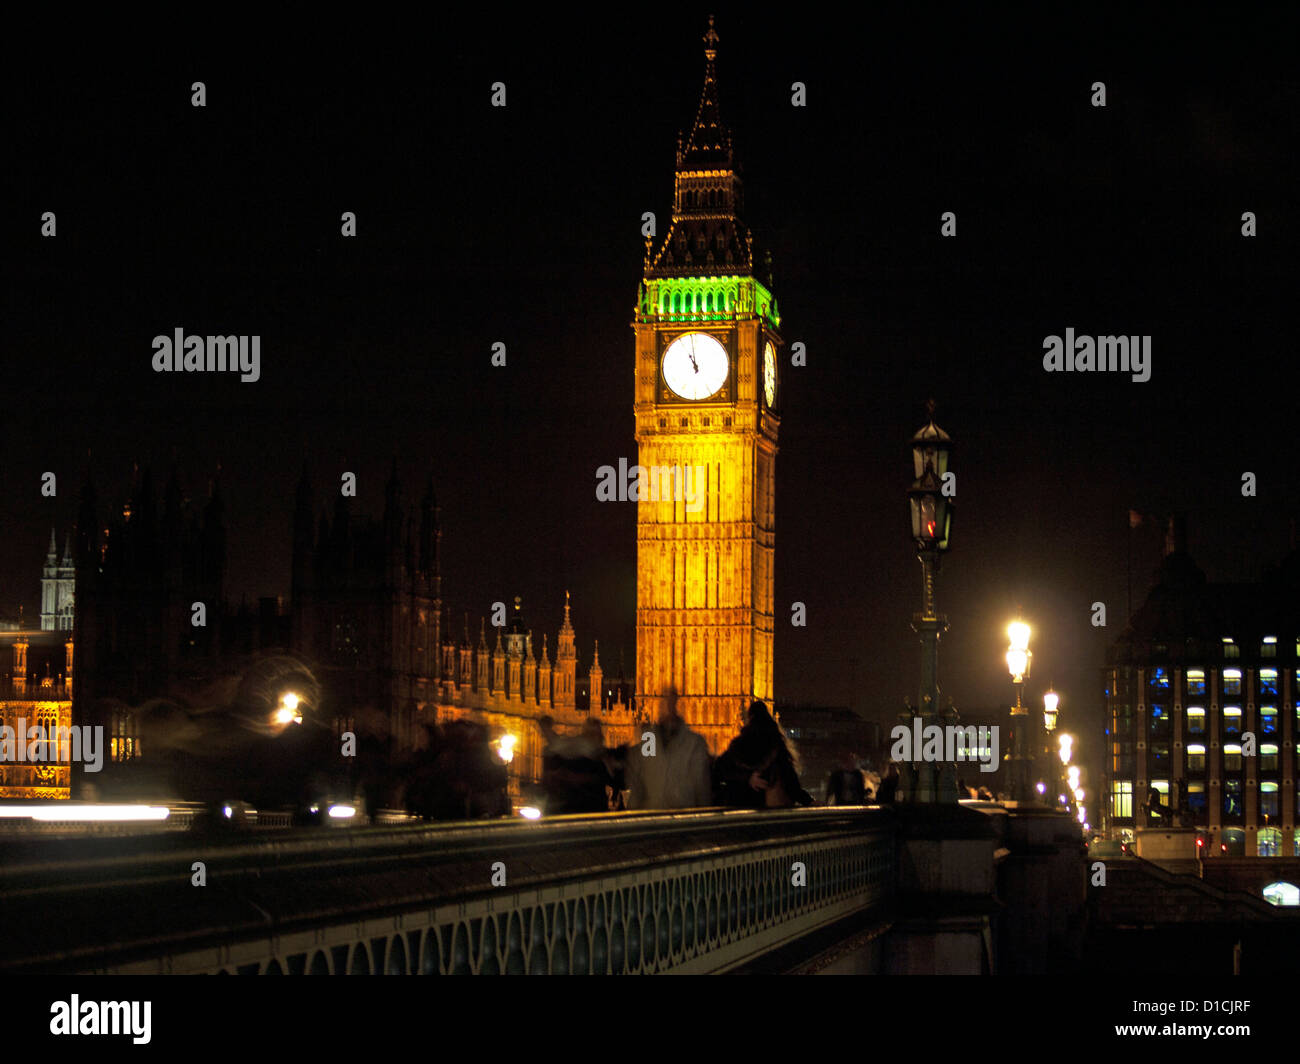 View of Westminster Bridge,Big Ben clock tower and the Palace of Westminster (Houses of Parliament), UNESCO World Heritage Site. Stock Photo